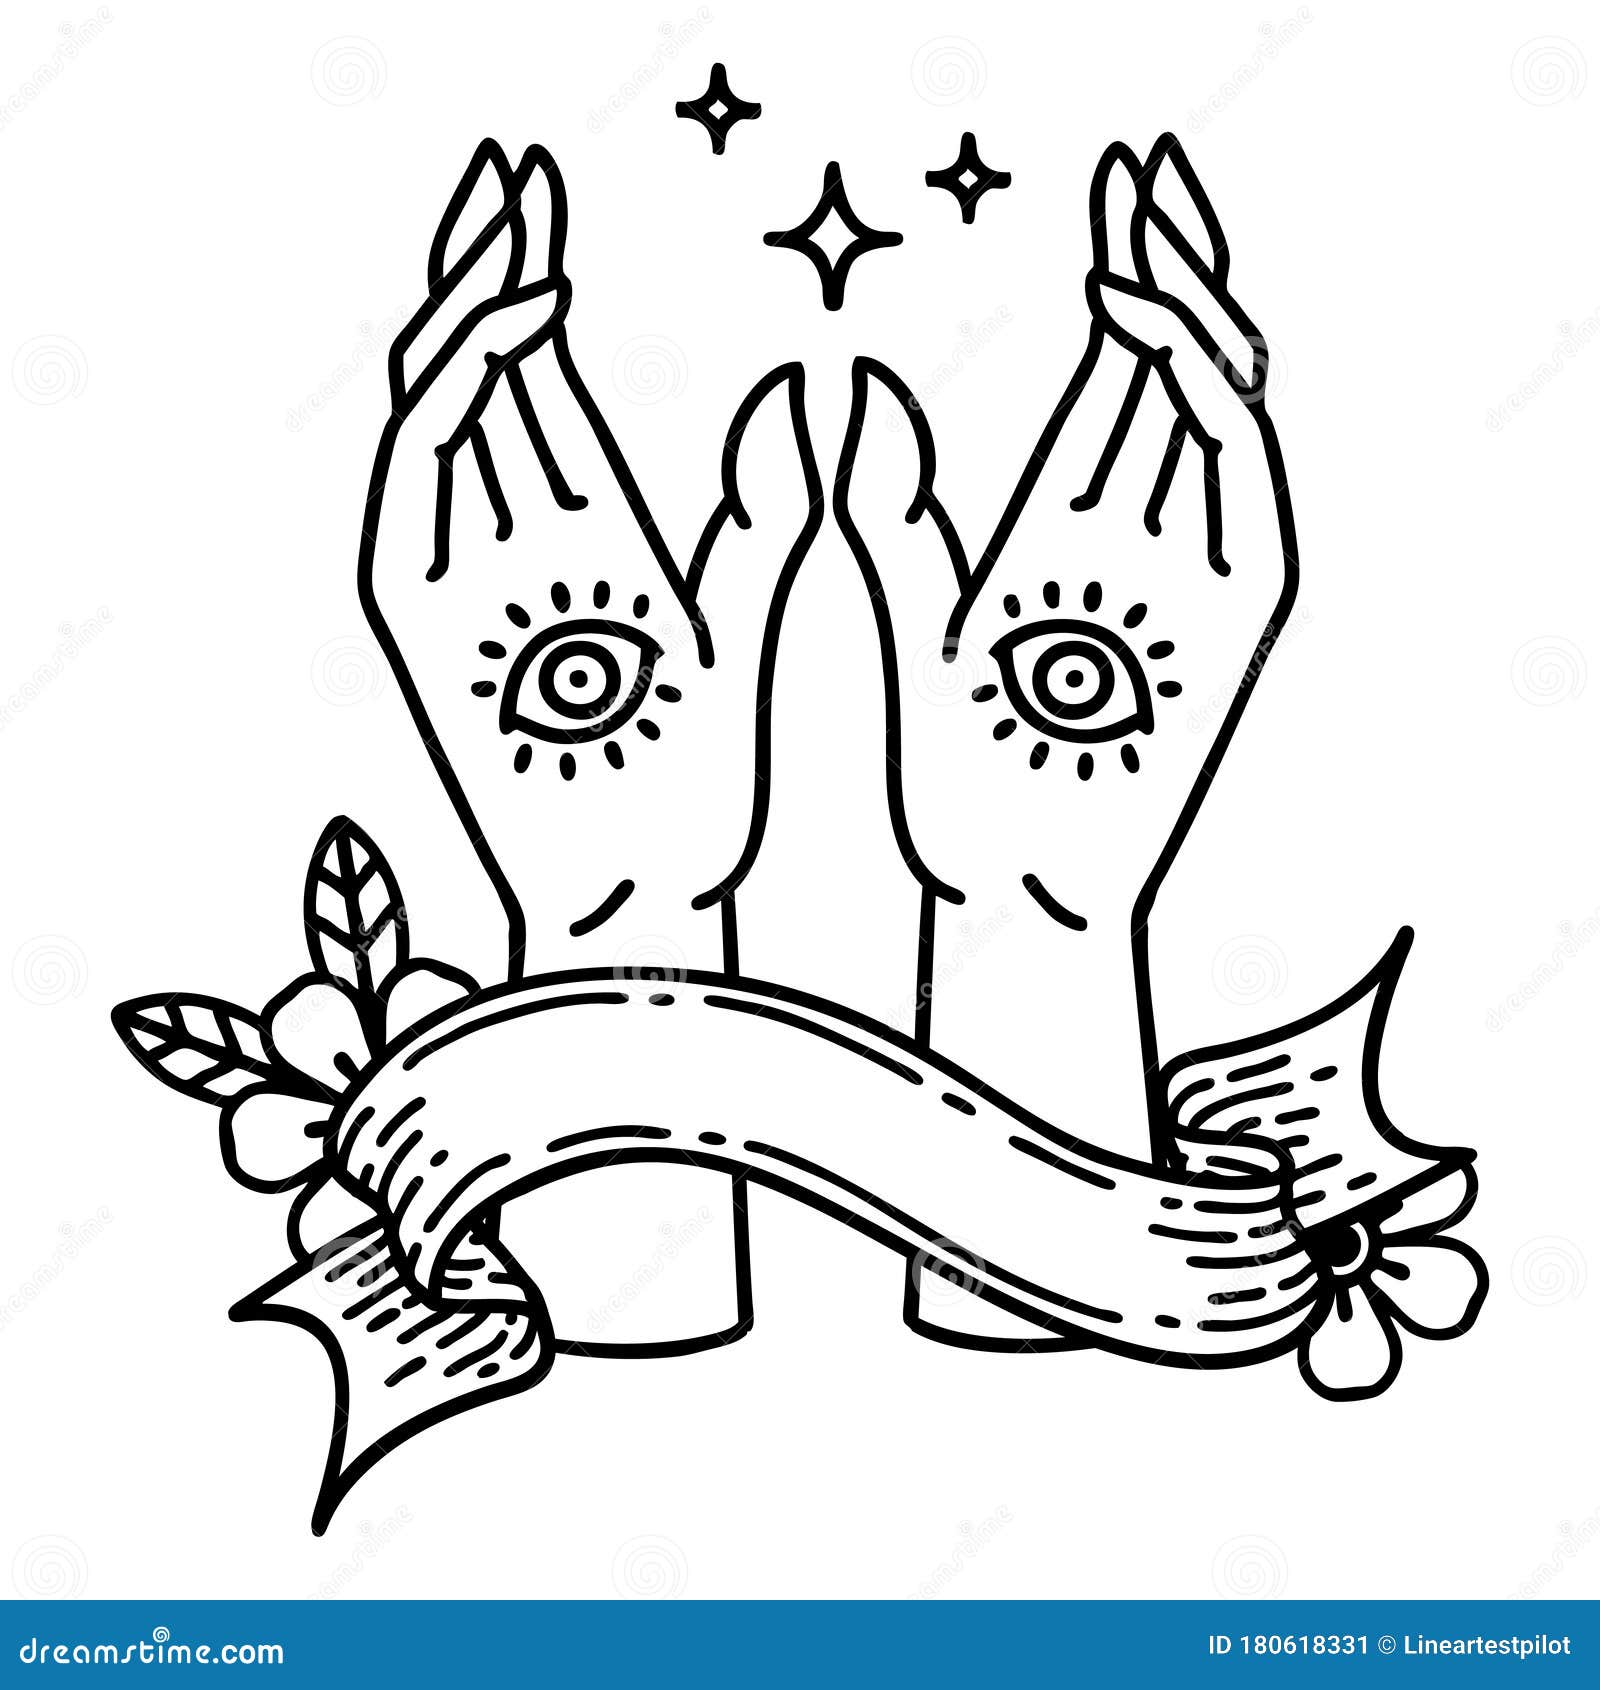 Black Linework Tattoo with Banner of Mystic Hands Stock Vector ...